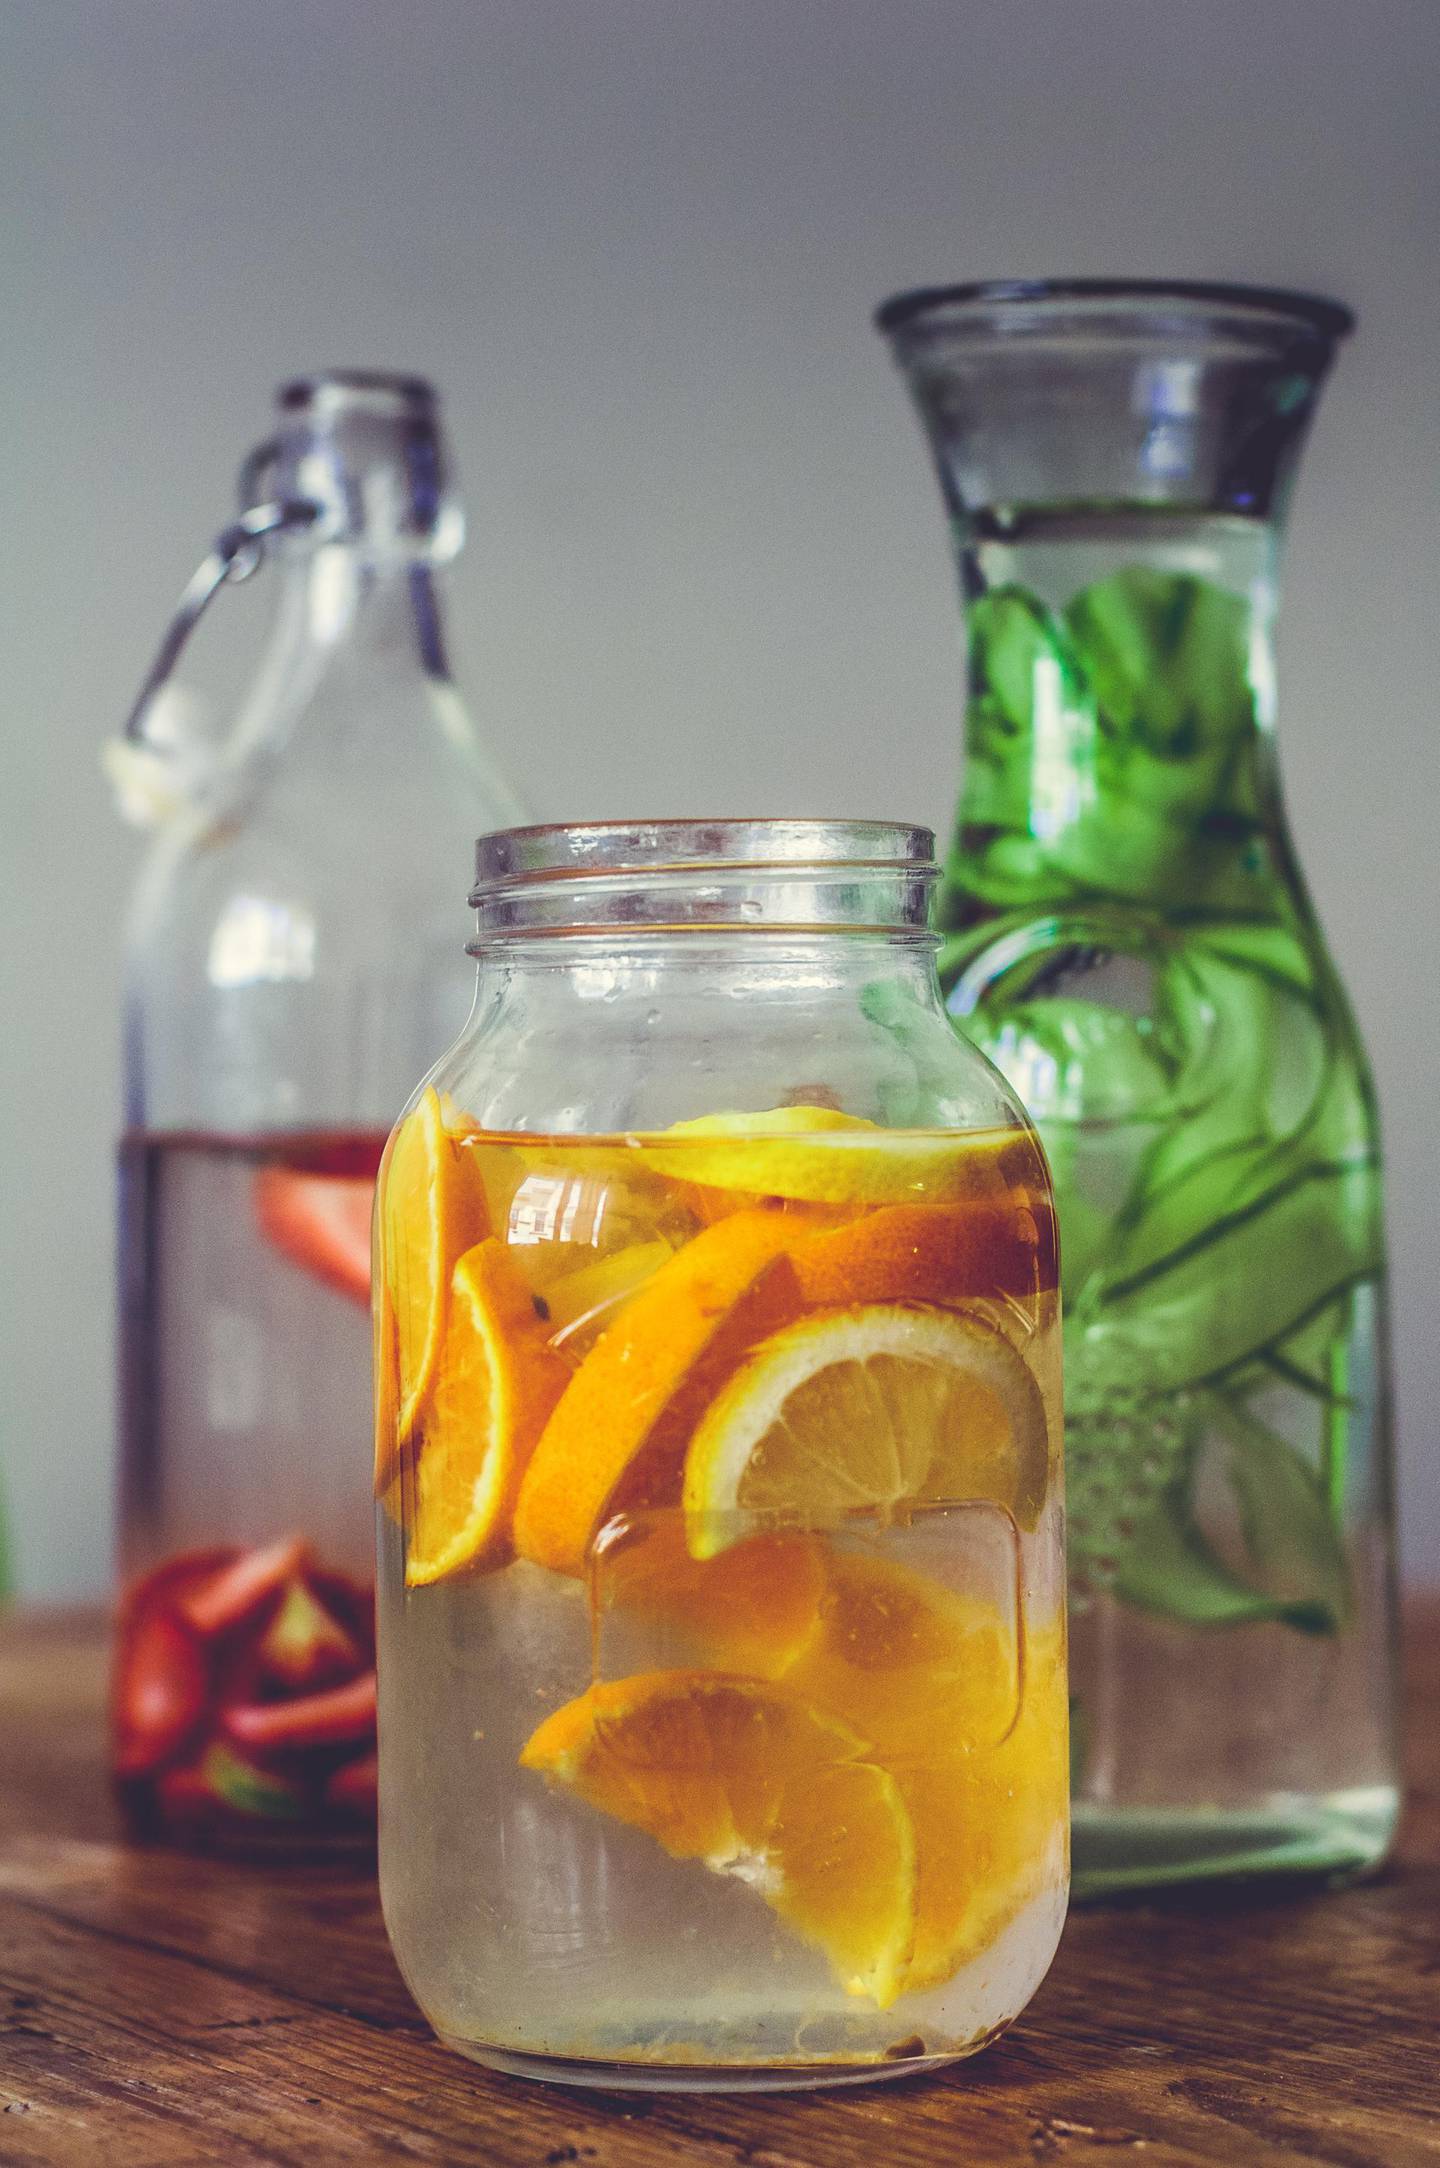 Flavouring your water may inspire you to drink more. Courtesy Scott Price